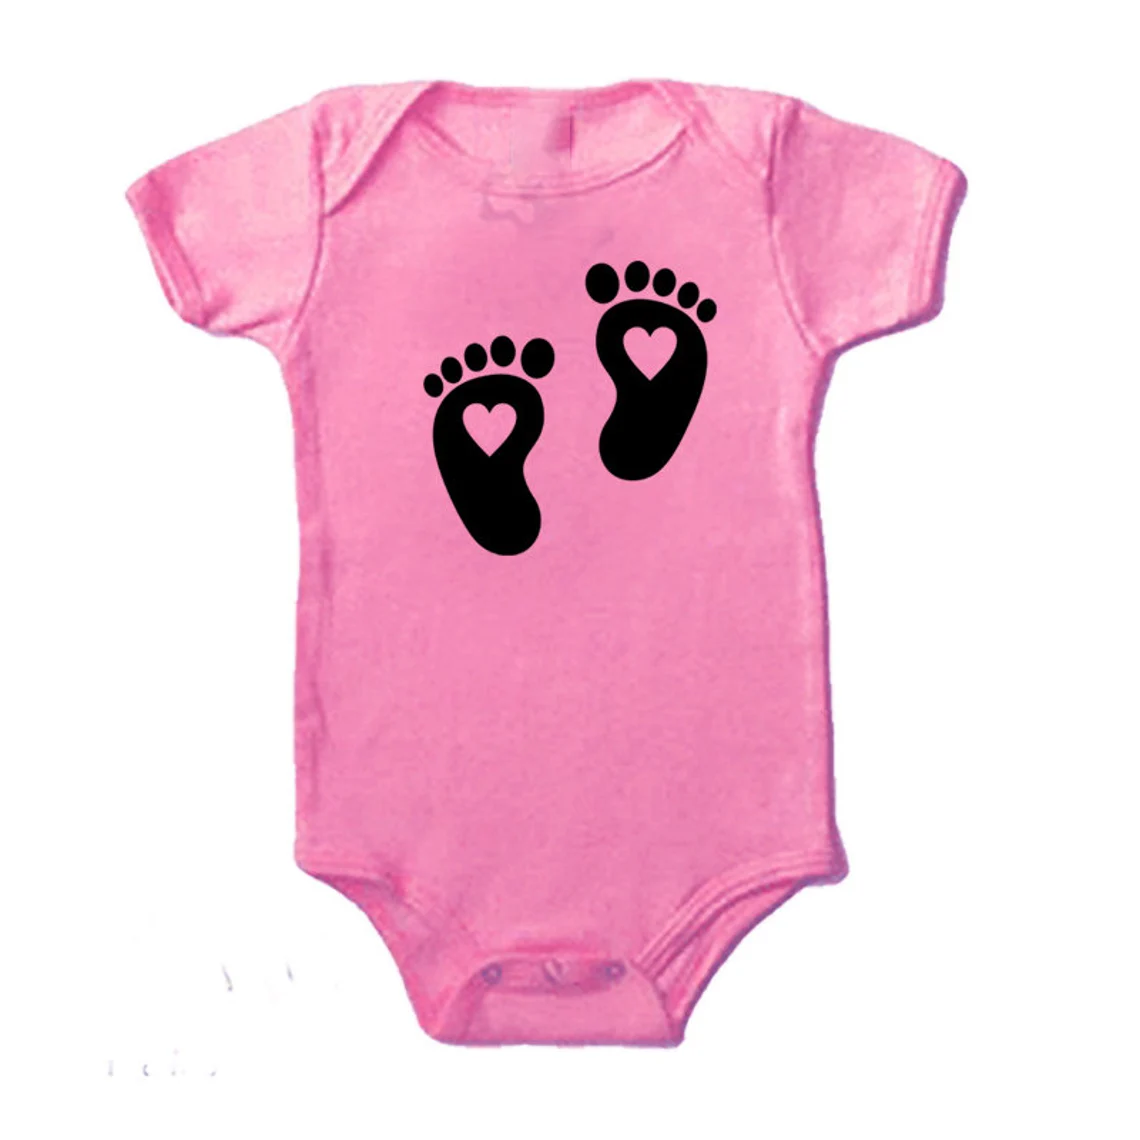 Pink children's clothes with footprints.